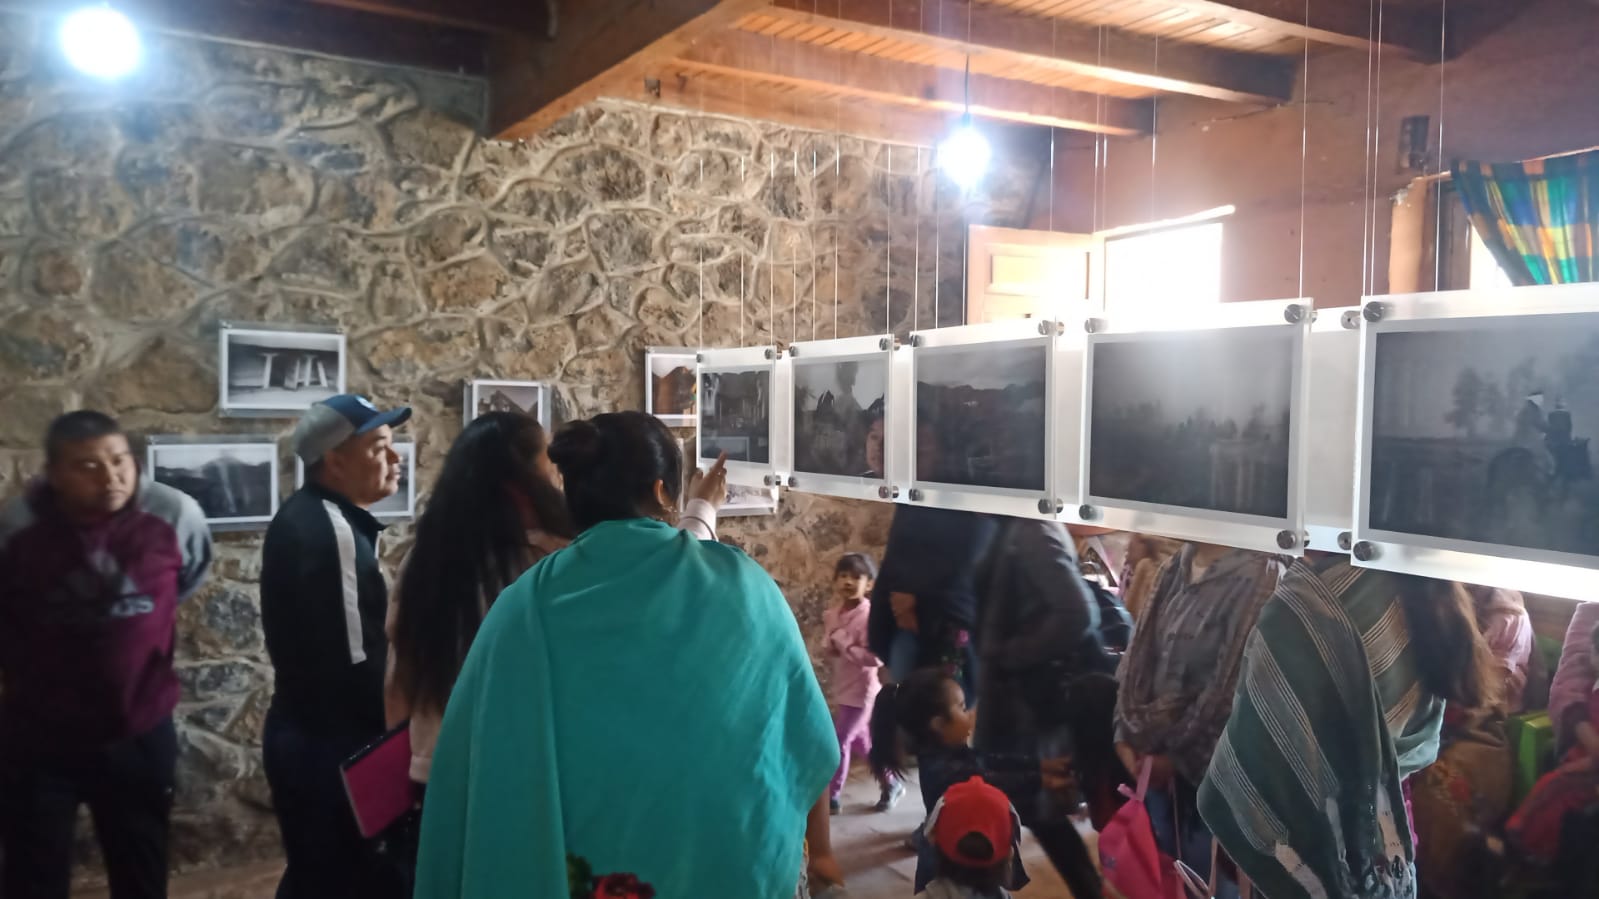 Photo exhibit with children and adults looking at the images